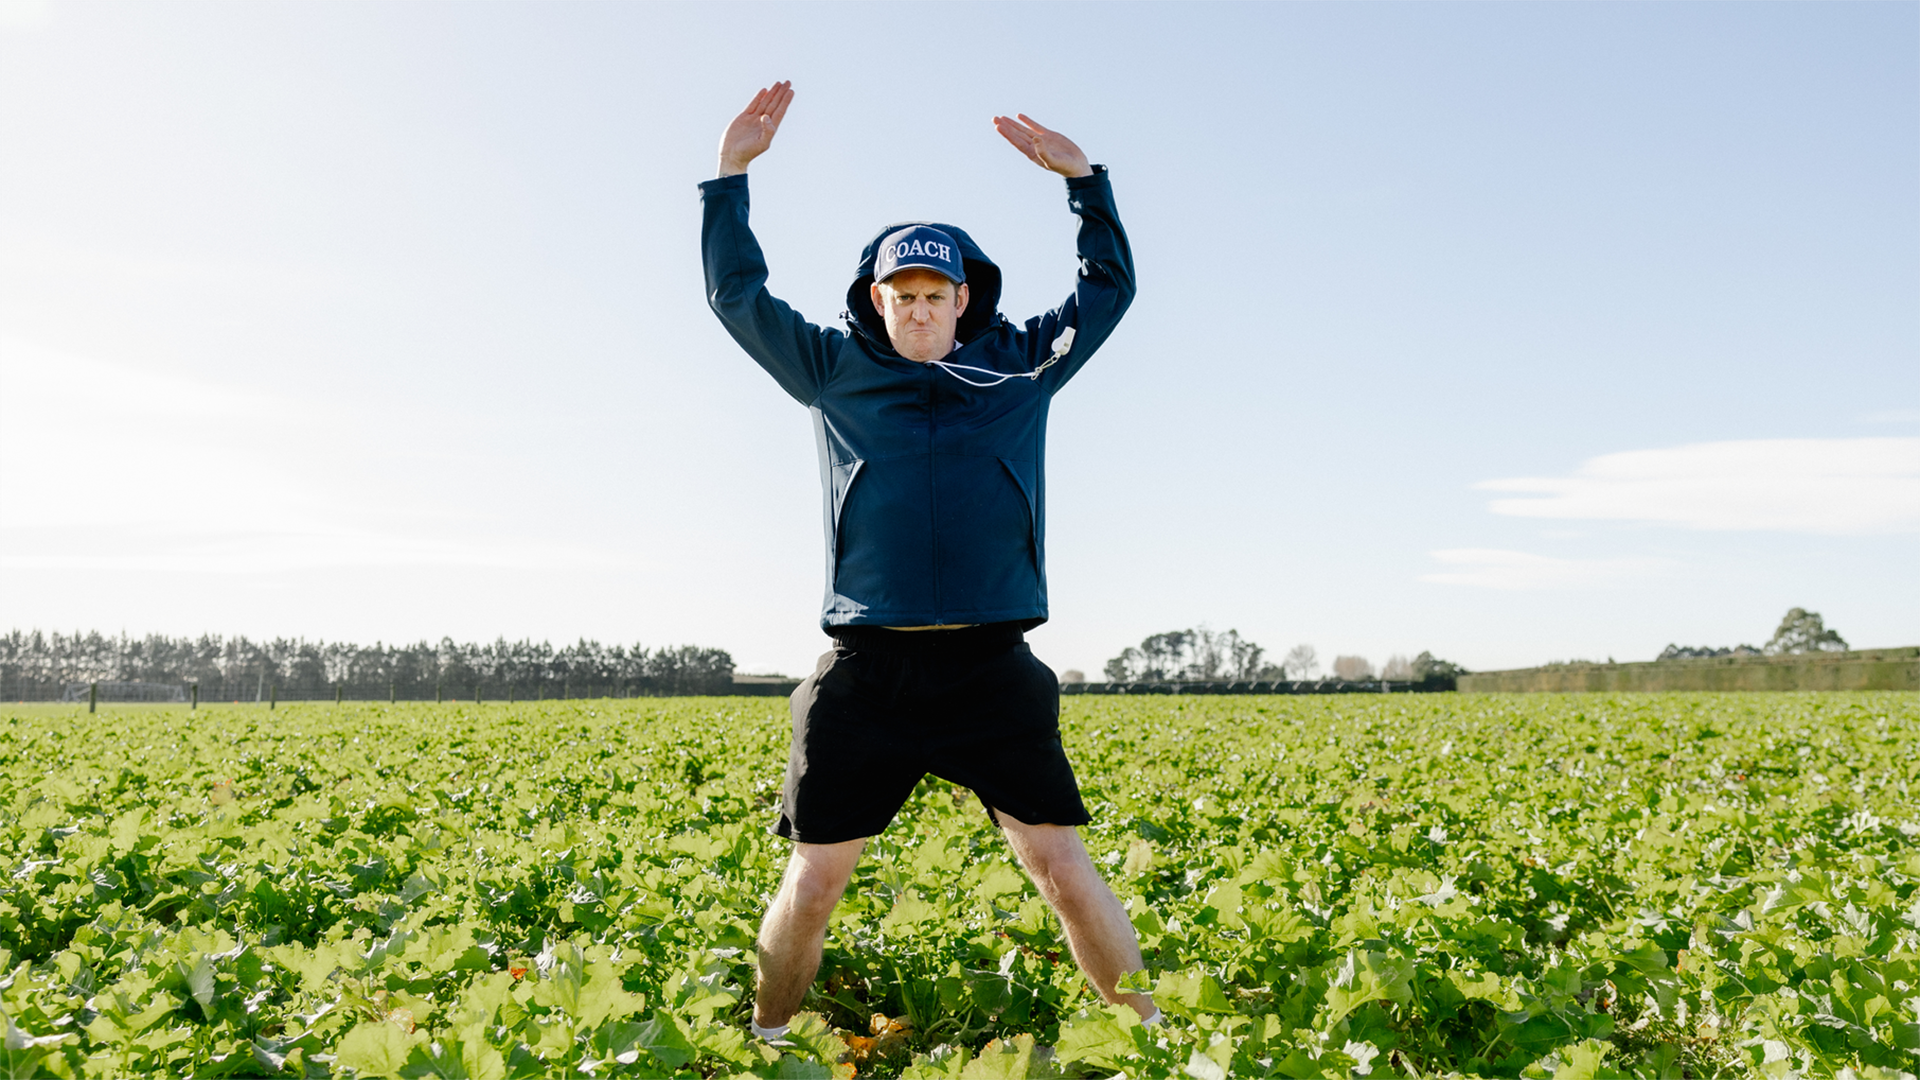 Person doing star jumps in middle of field of crops